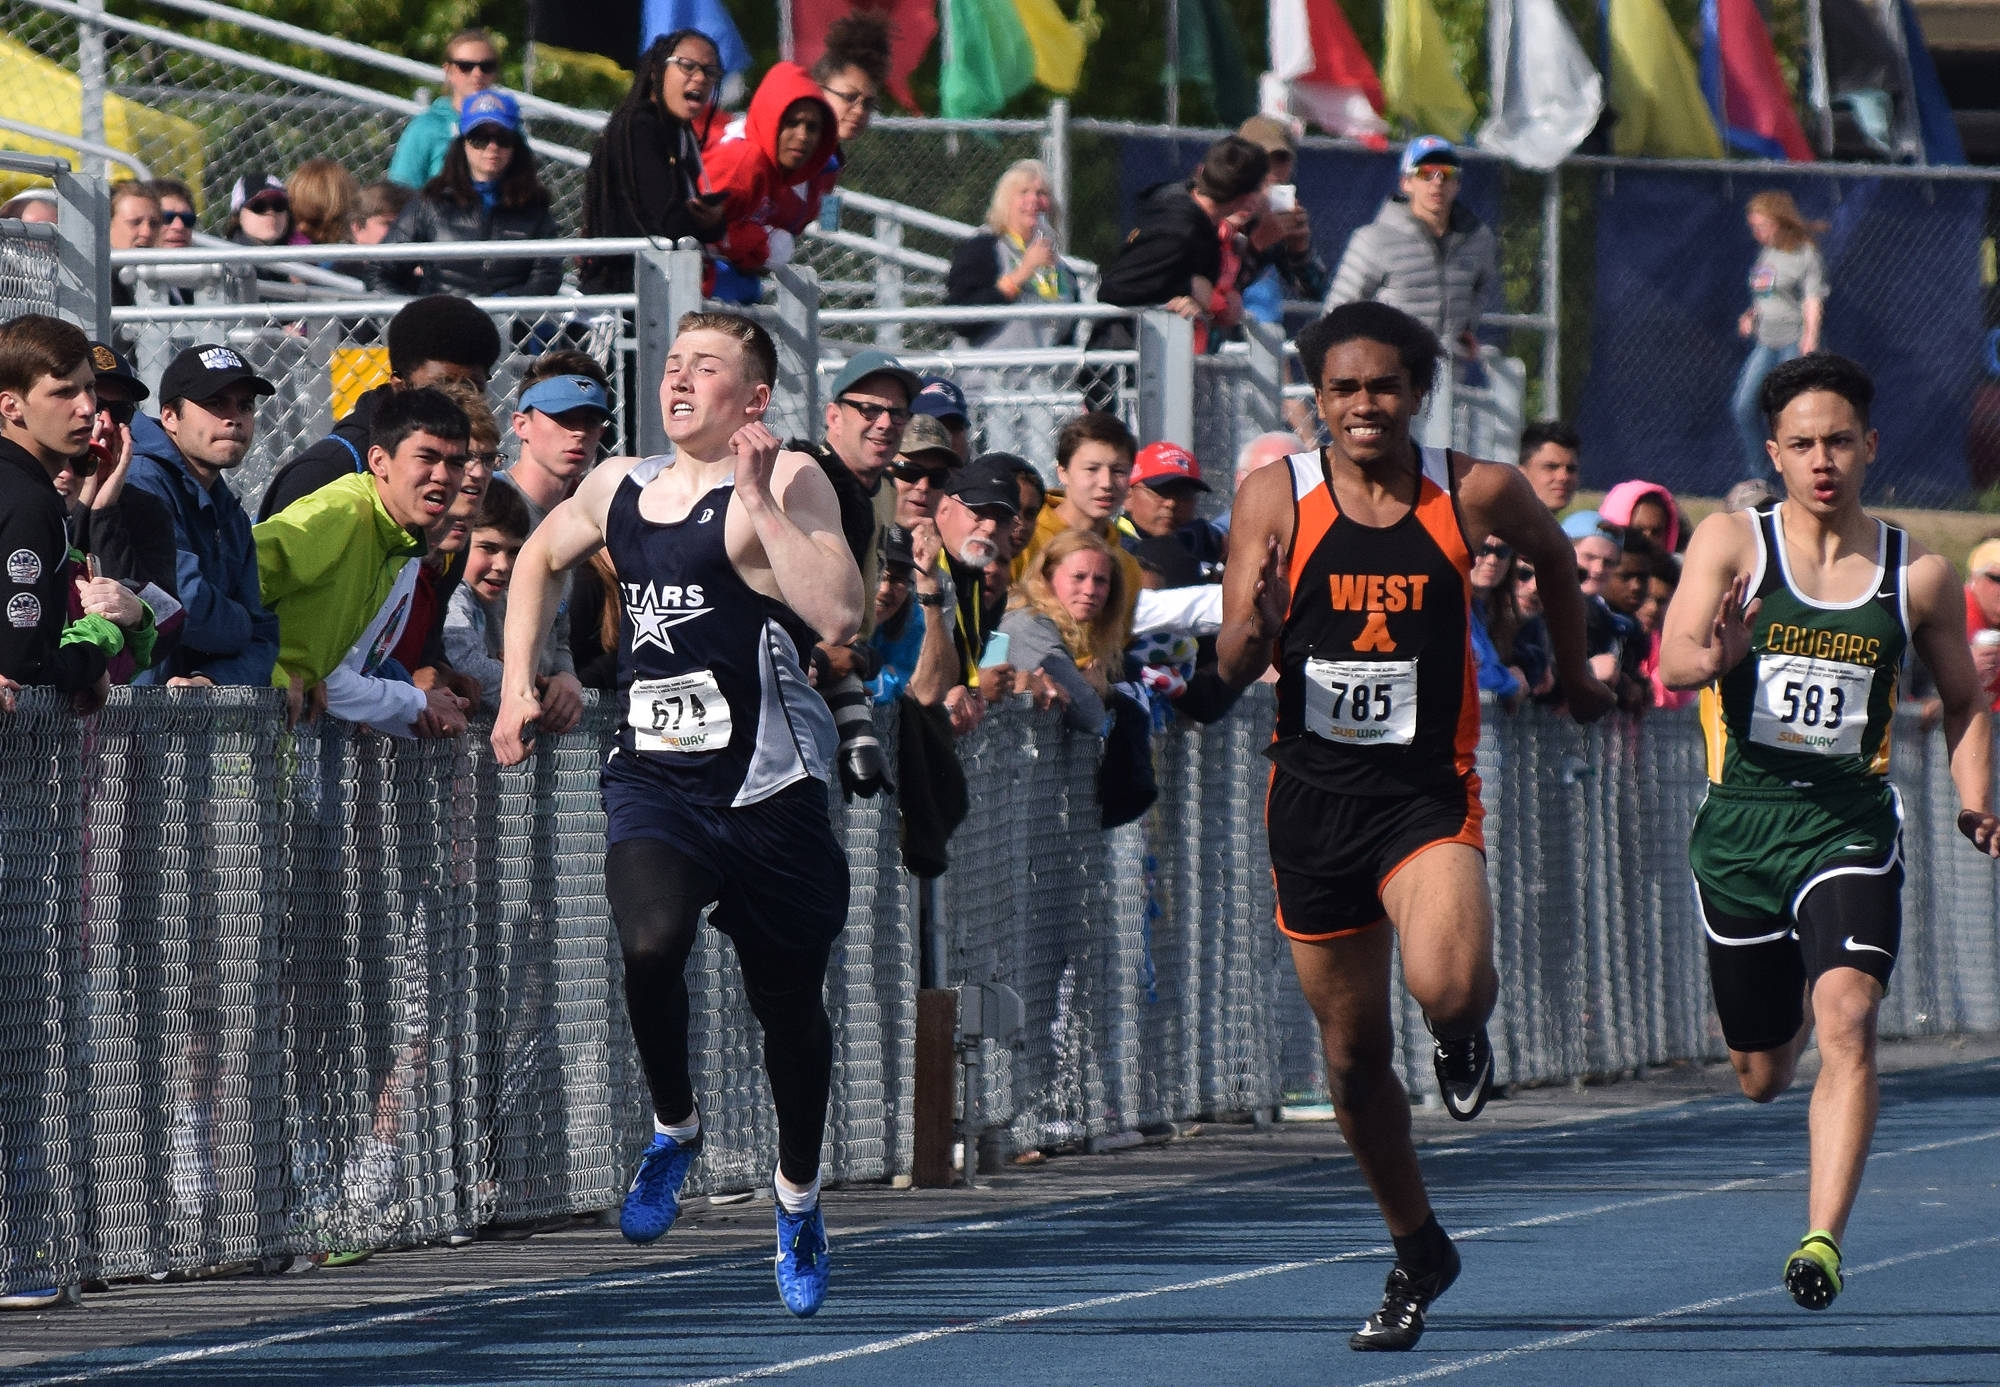 Soldotna’s Brenner Furlong (left) sprints to the finish line of the Division I boys 200-meter dash Saturday afternoon at the Alaska Track and Field state championship meet at Palmer High School. (Photo by Joey Klecka/Peninsula Clarion)